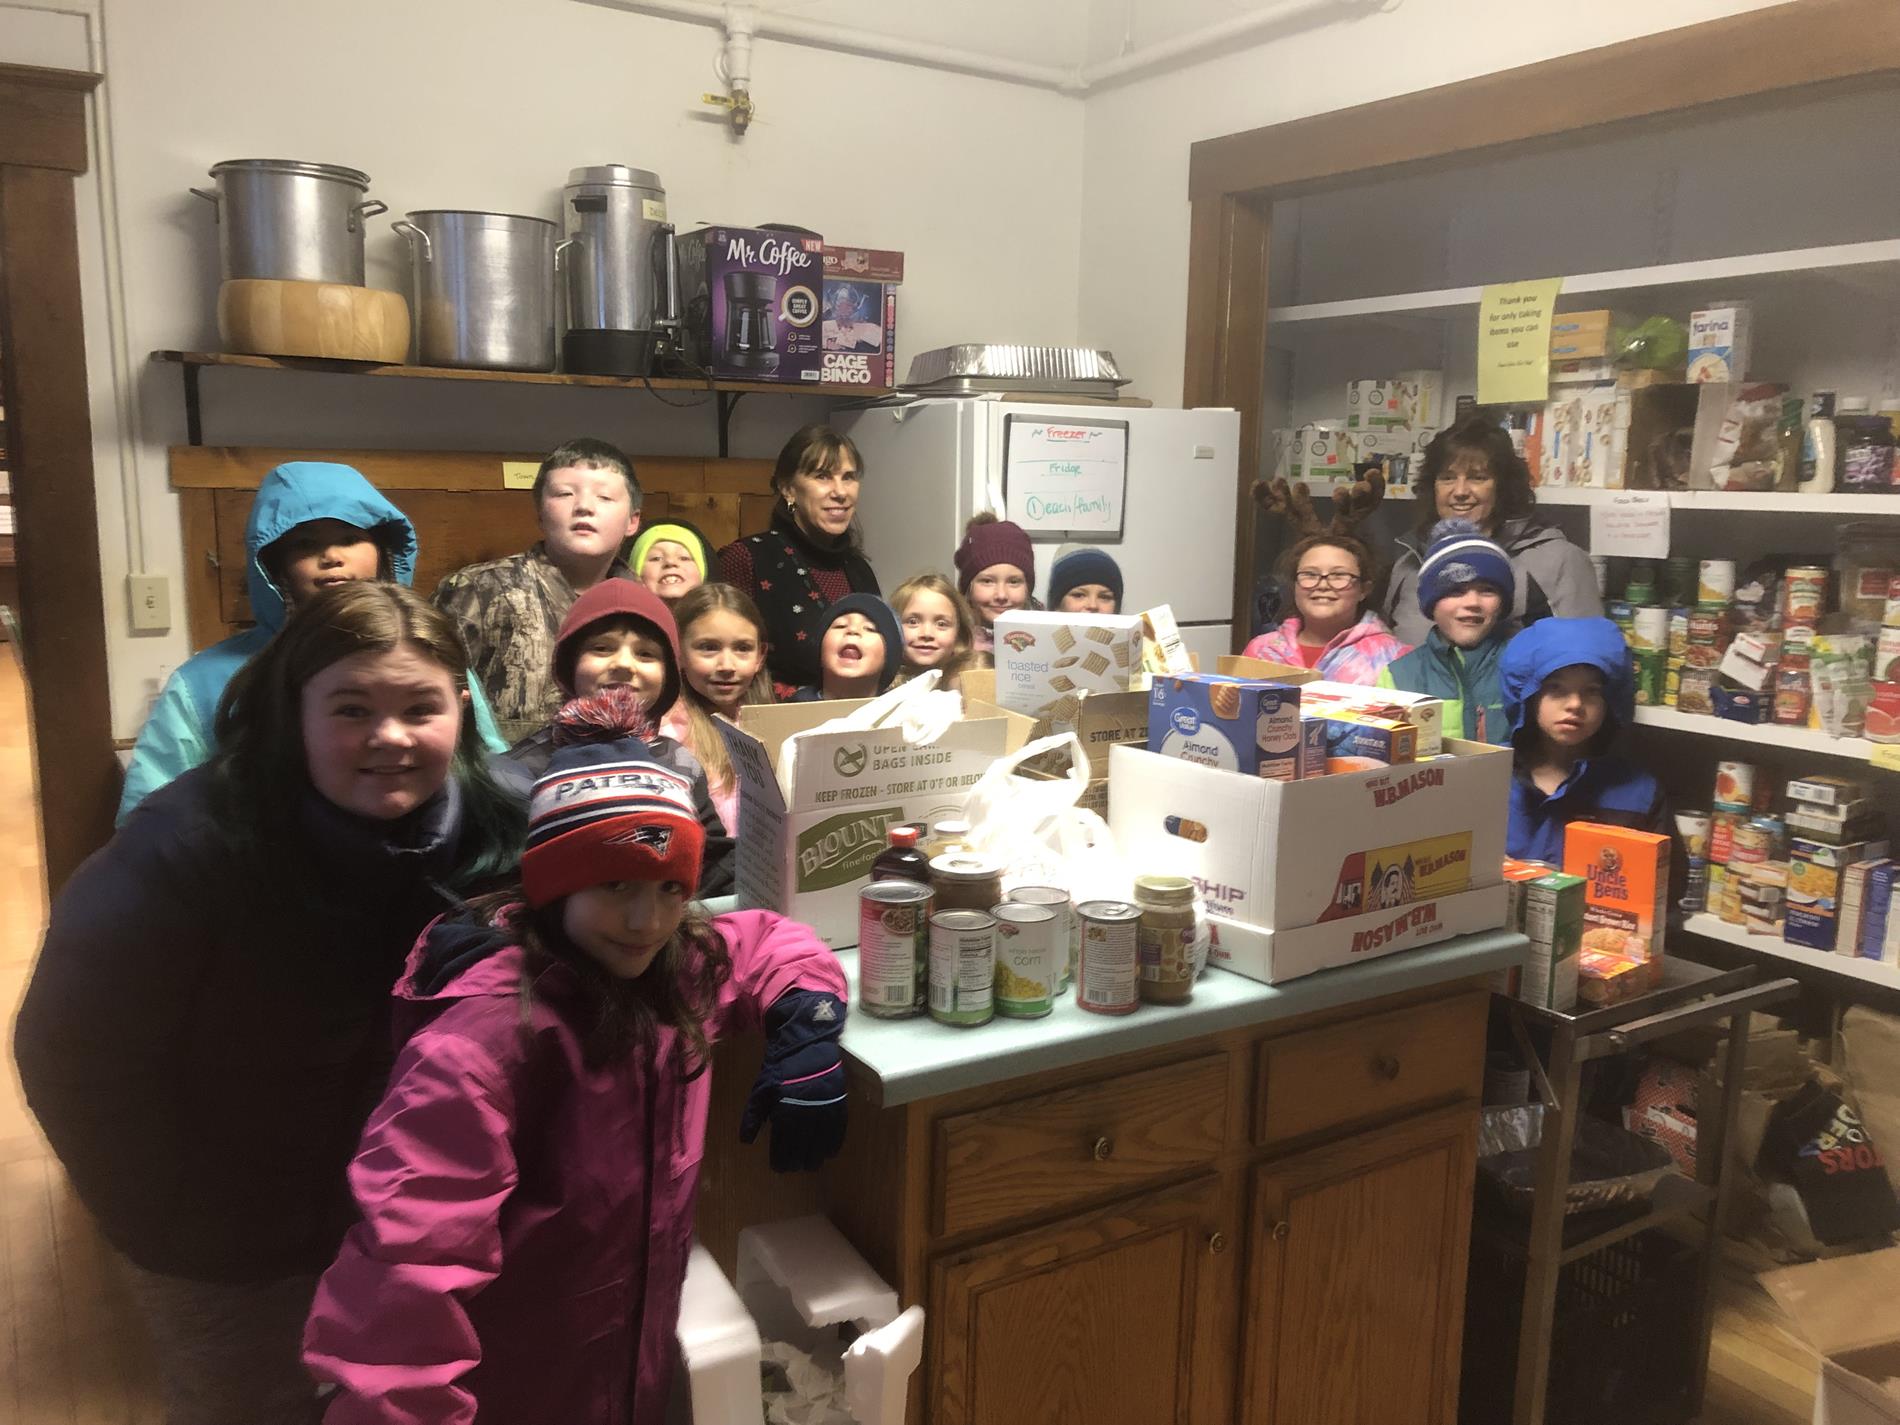 After The Bell After School Program drop off their donations at the Food Shelf